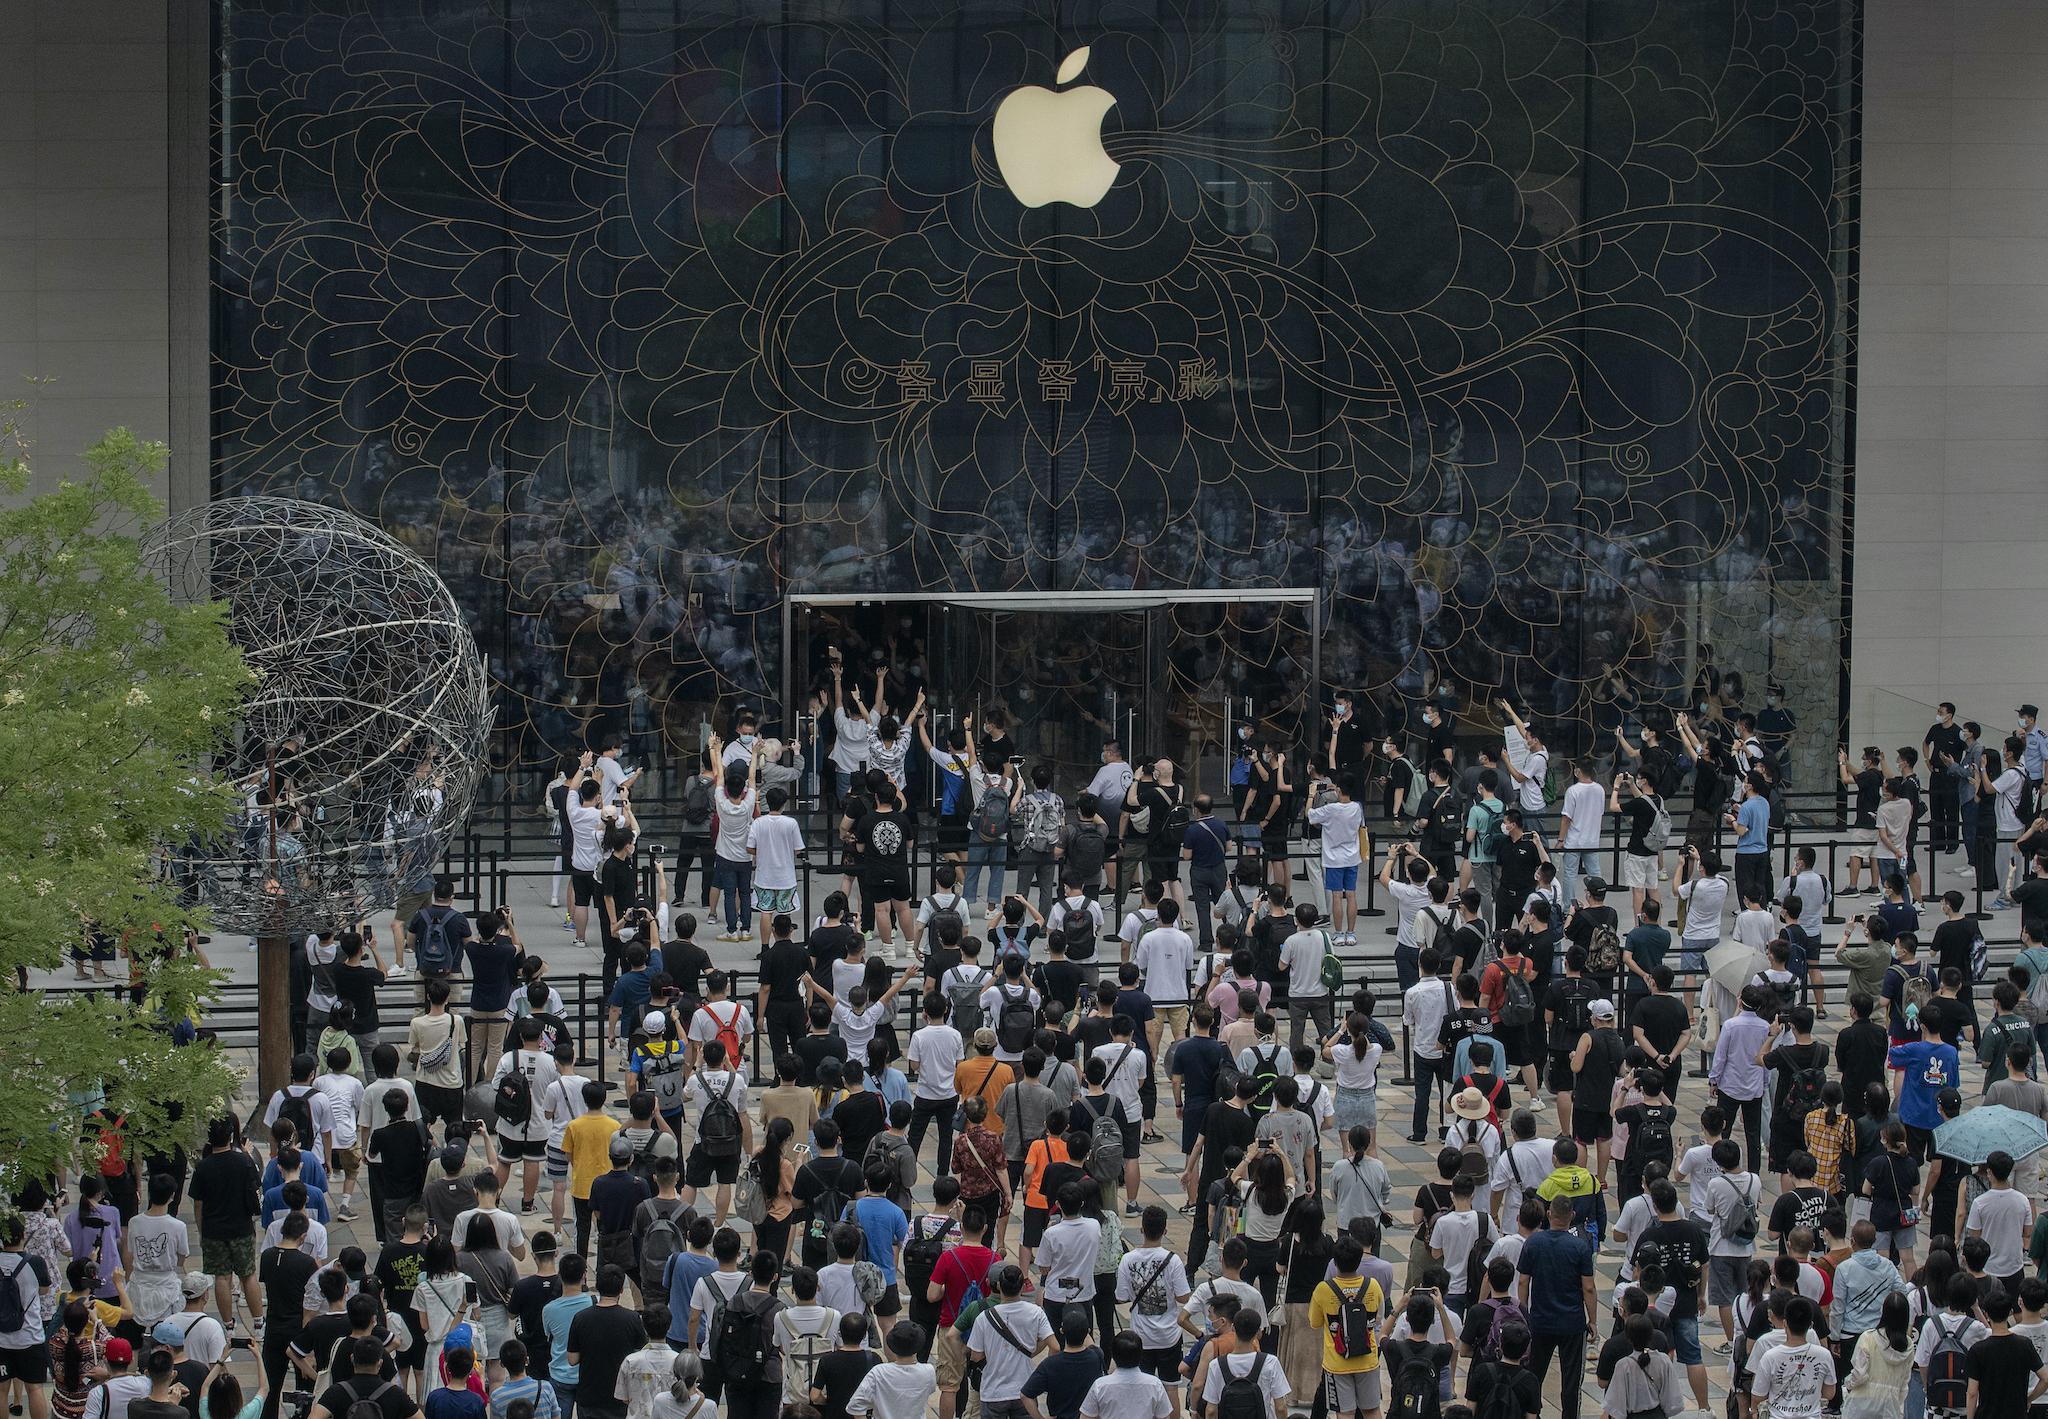 People wait in line following social distancing rules as others enter during the official opening of the new Apple Store in the Sanlitun shopping area on July 17, 2020 in Beijing, China